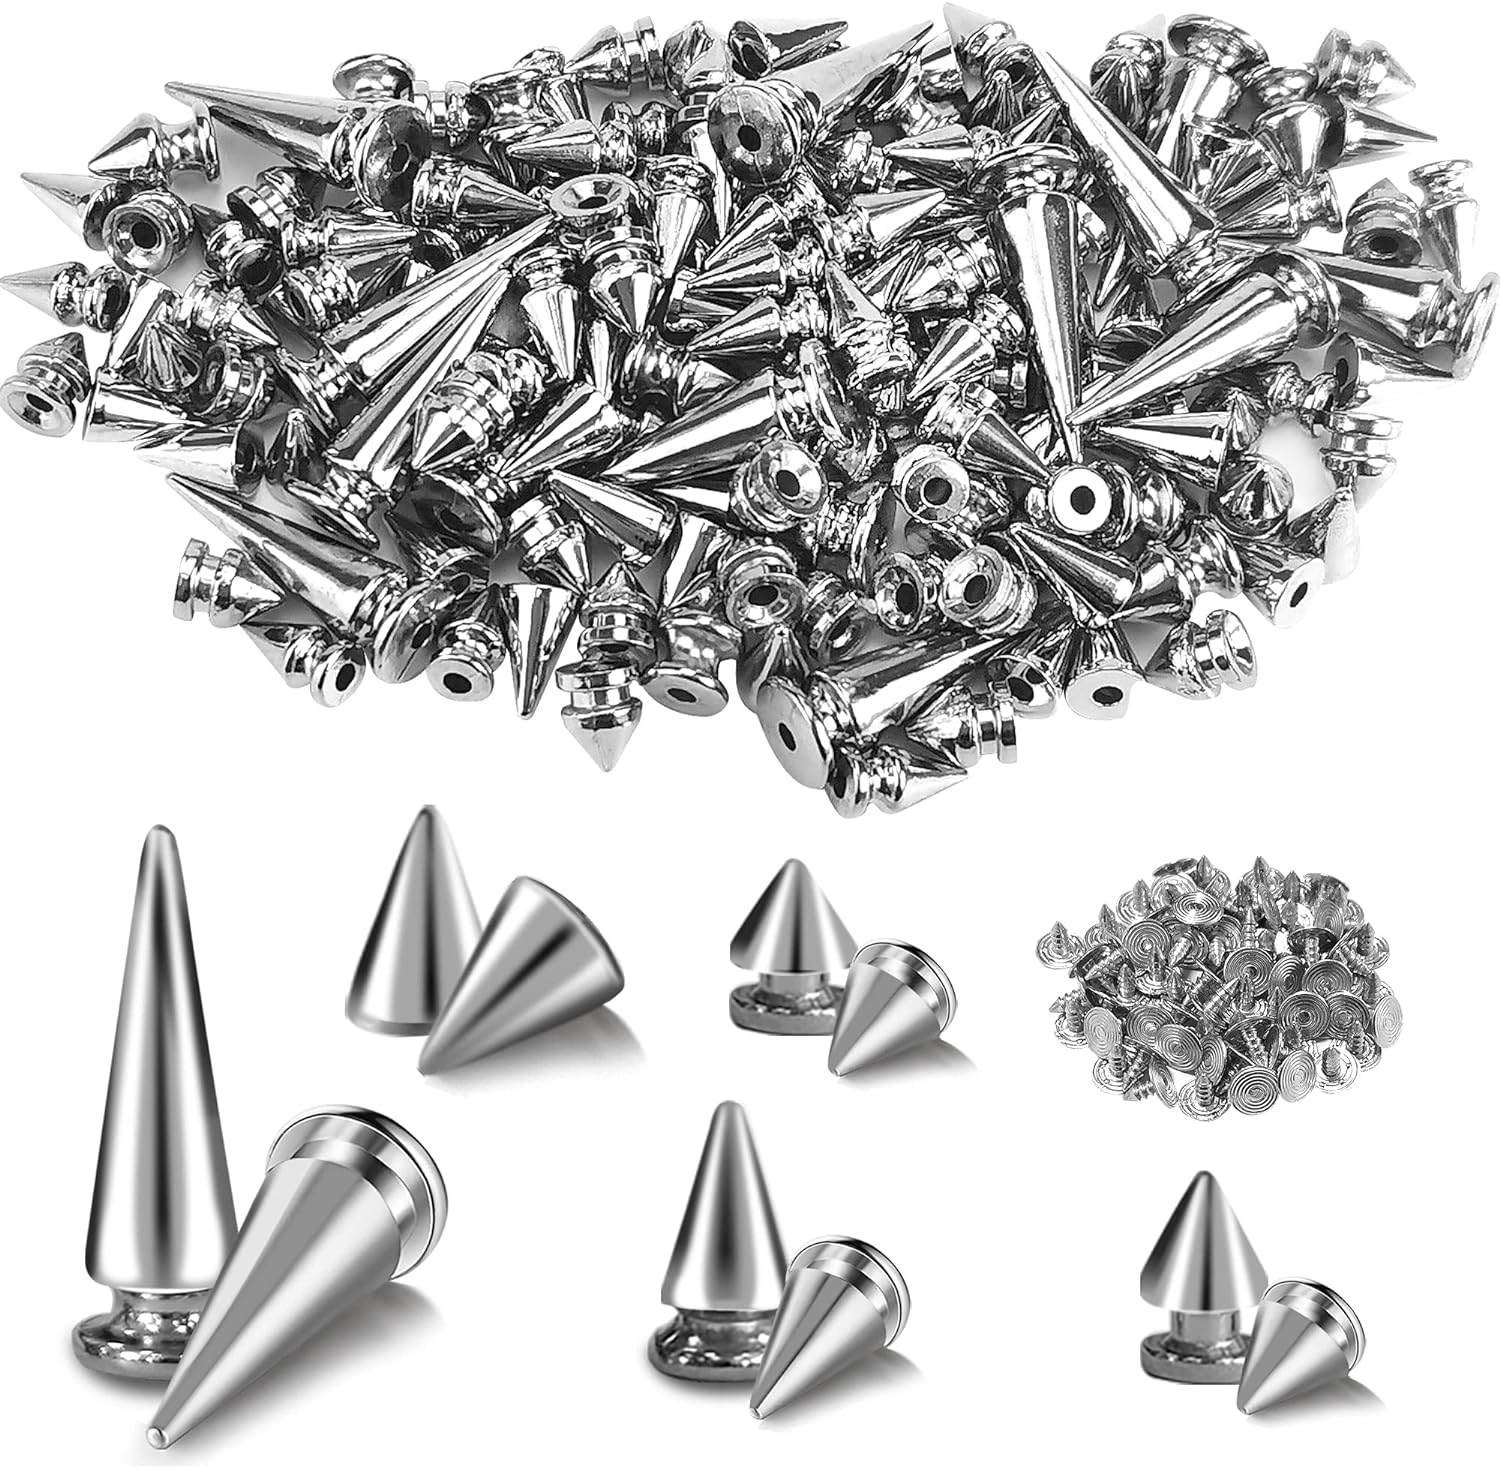 Bastex 205pcs Studs and Spikes. Metal Spikes and Punk Studs for Clothing,  Jacket Studs. Cone Small Metal Studs and Metal Spikes for DIY Leather  Craft.